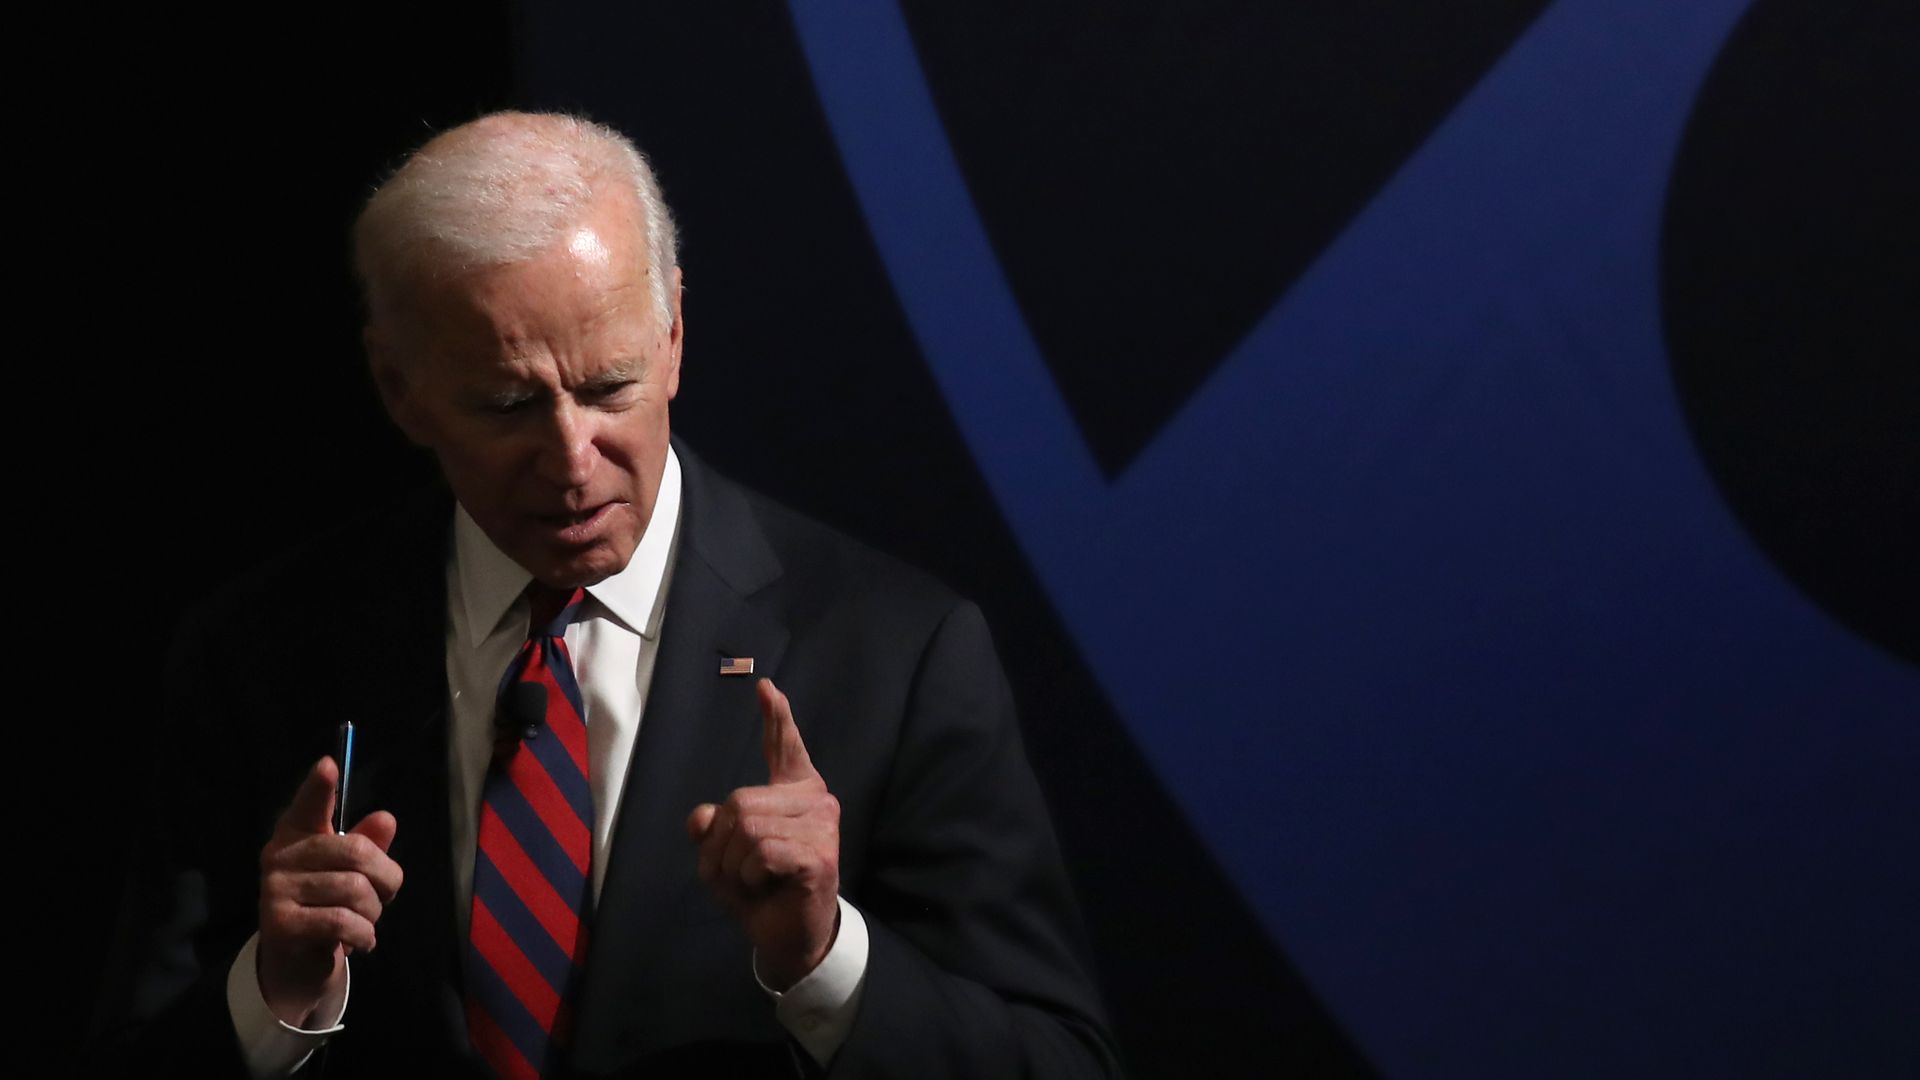 Joe Biden says he is "very close" to making a decision on whether to run for president in 2020.